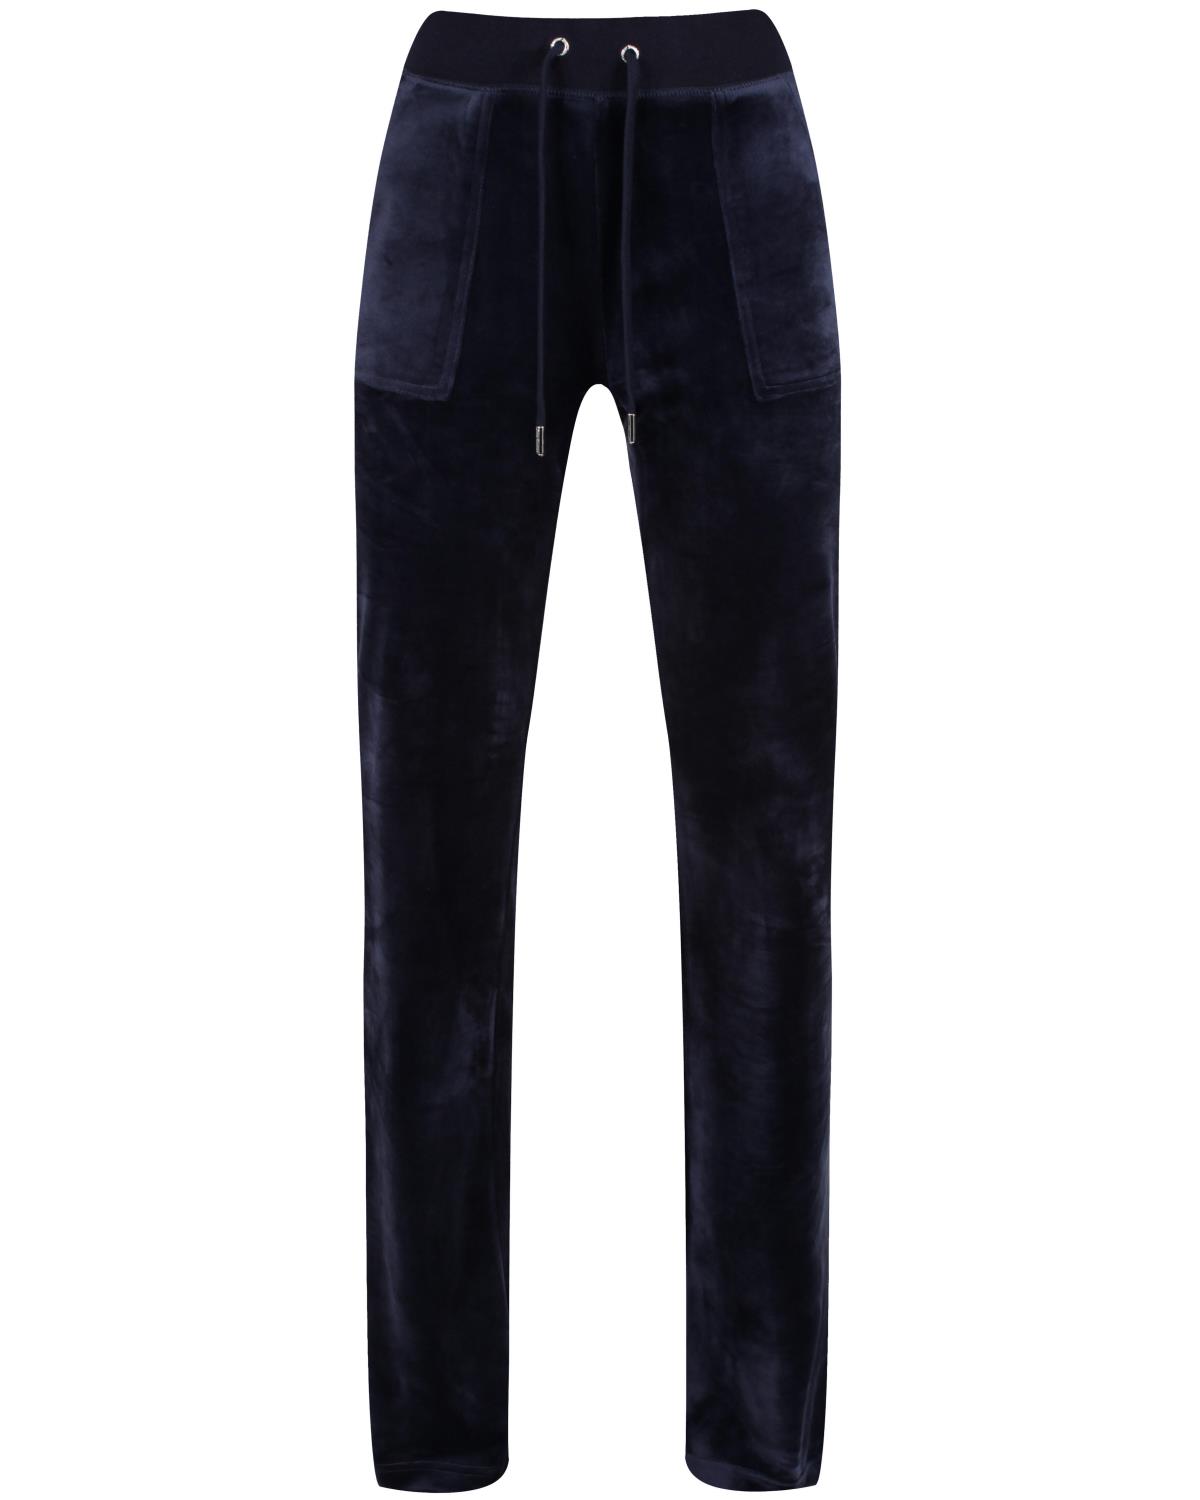 Del Ray Classic velour pant pocket design Night sky FORHÅNDSSALG - Juicy Couture